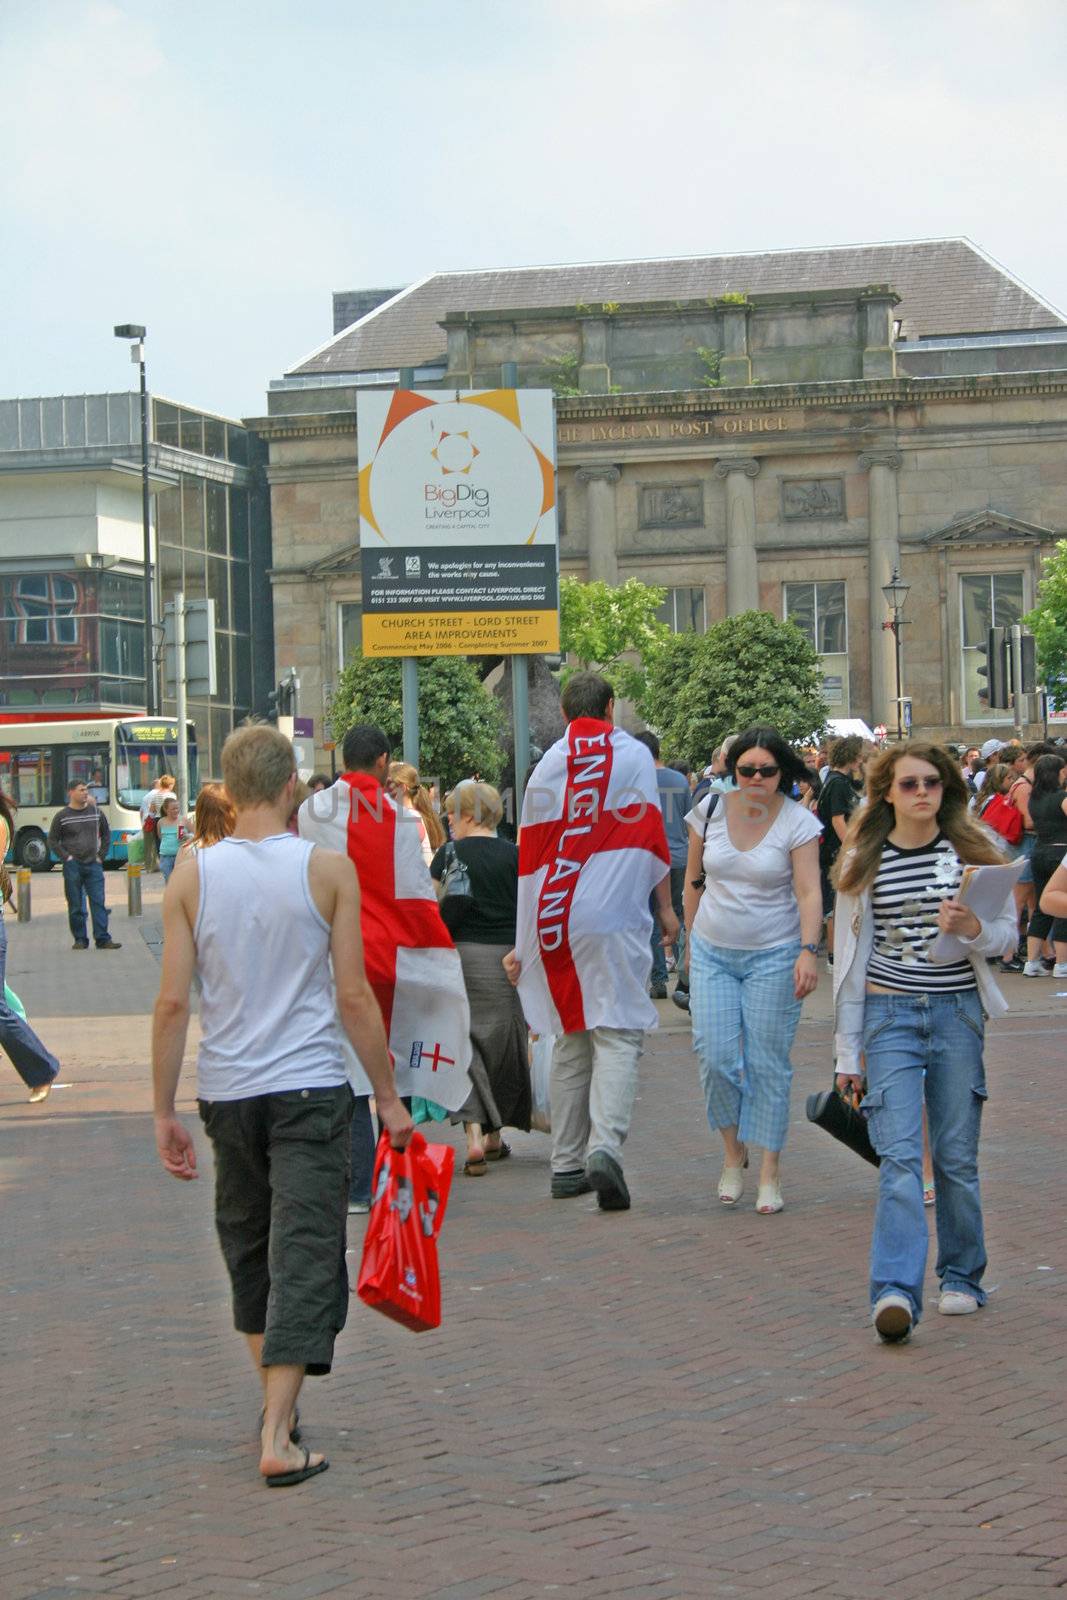 England Football Supporters in Liverpool